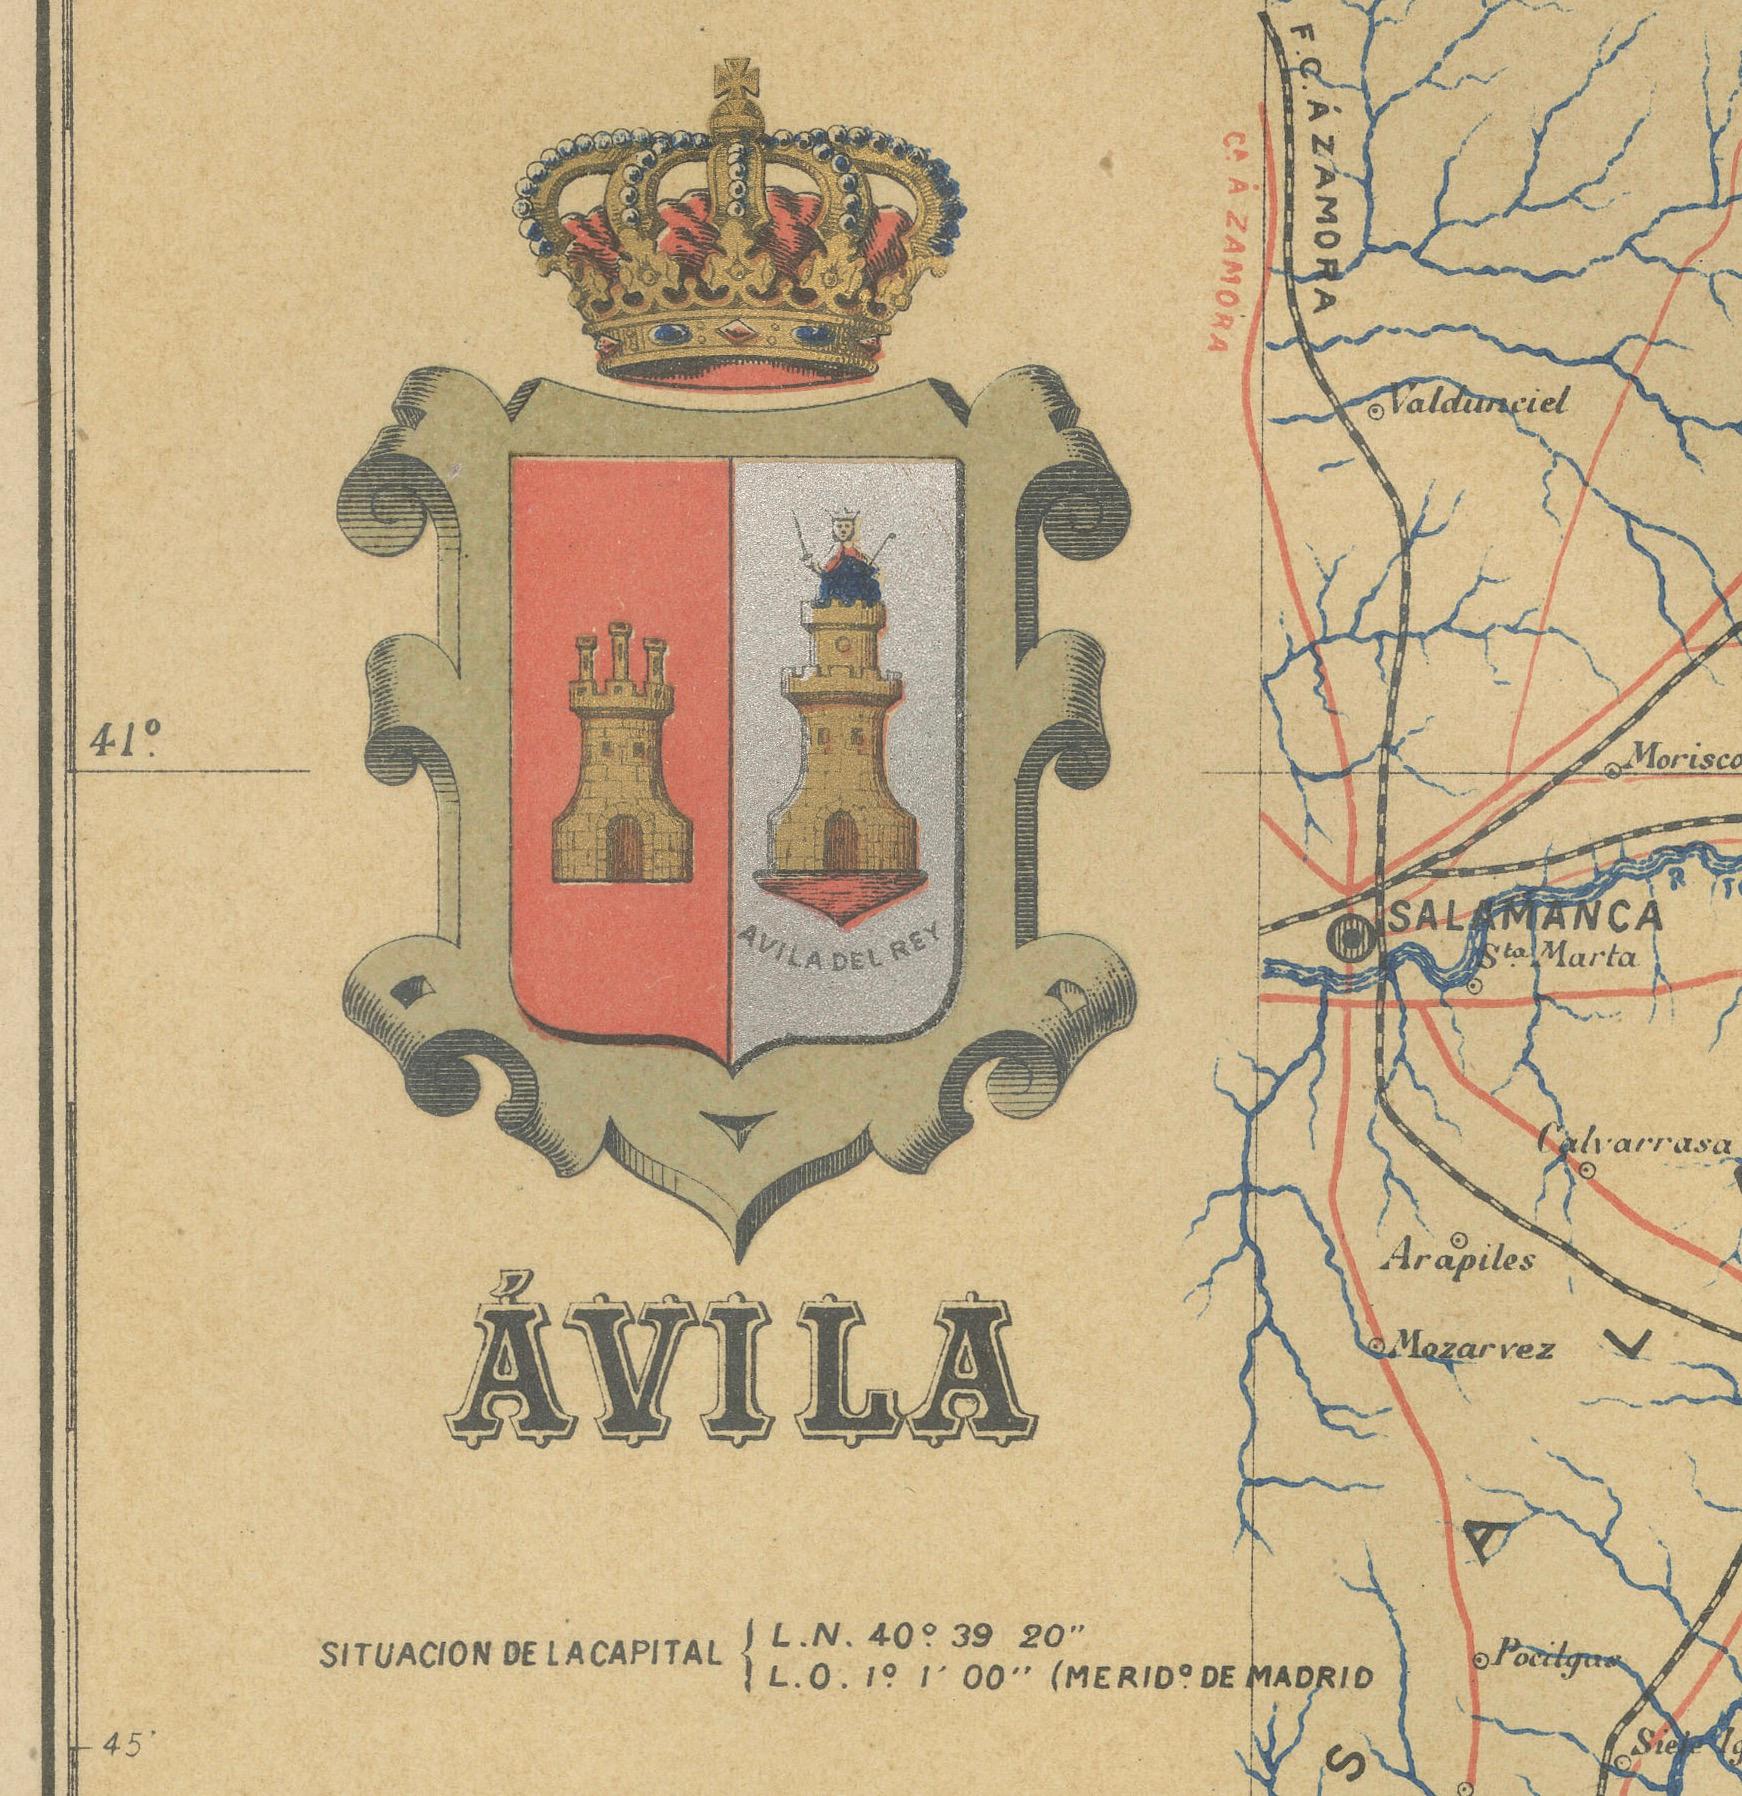 The map is of the province of Ávila, one of the provinces of the autonomous community of Castile and León in Spain, and it is dated from 1902. The map illustrates several geographic and man-made features:

It shows the varying elevations within the